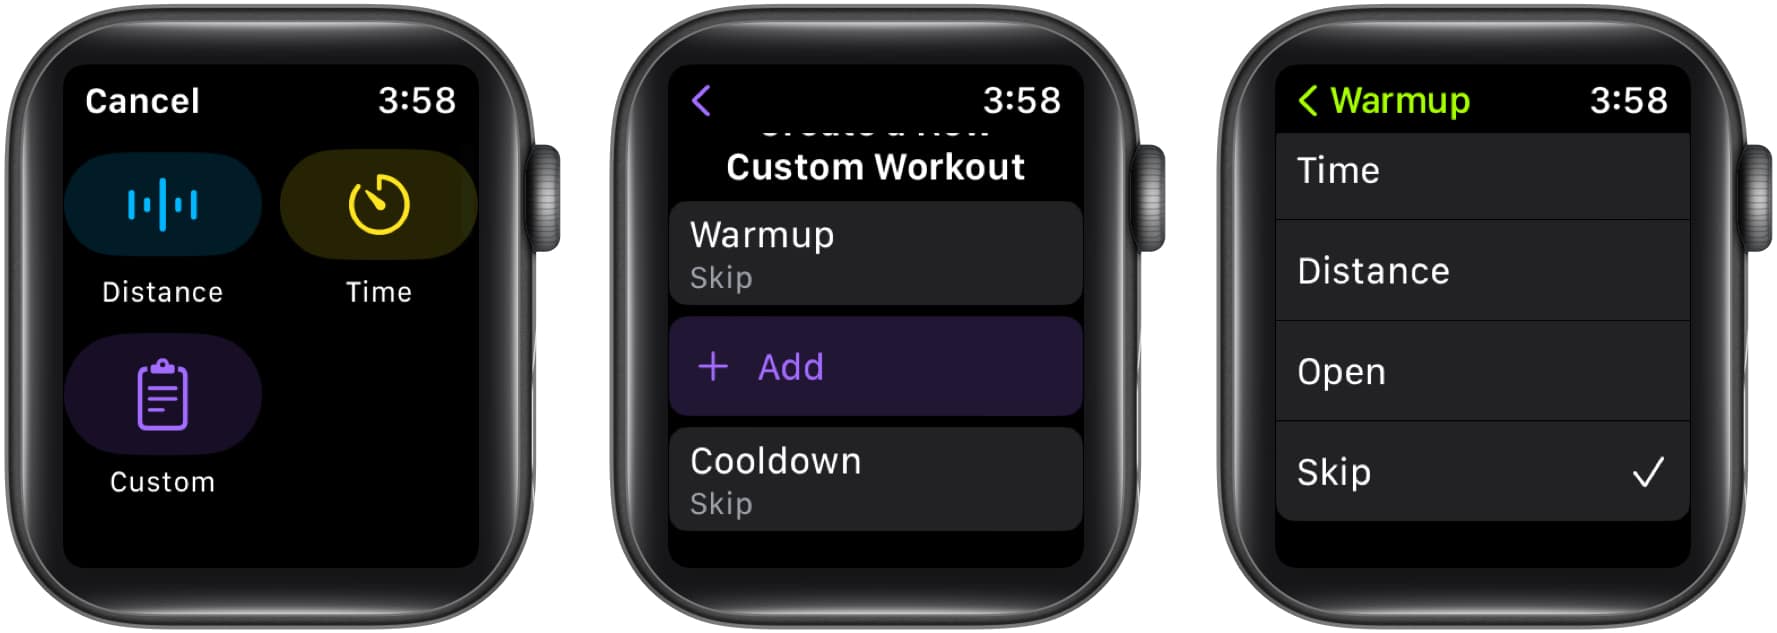 Pick Custom, tap Warmup, select Time, Distance, Open, Skip